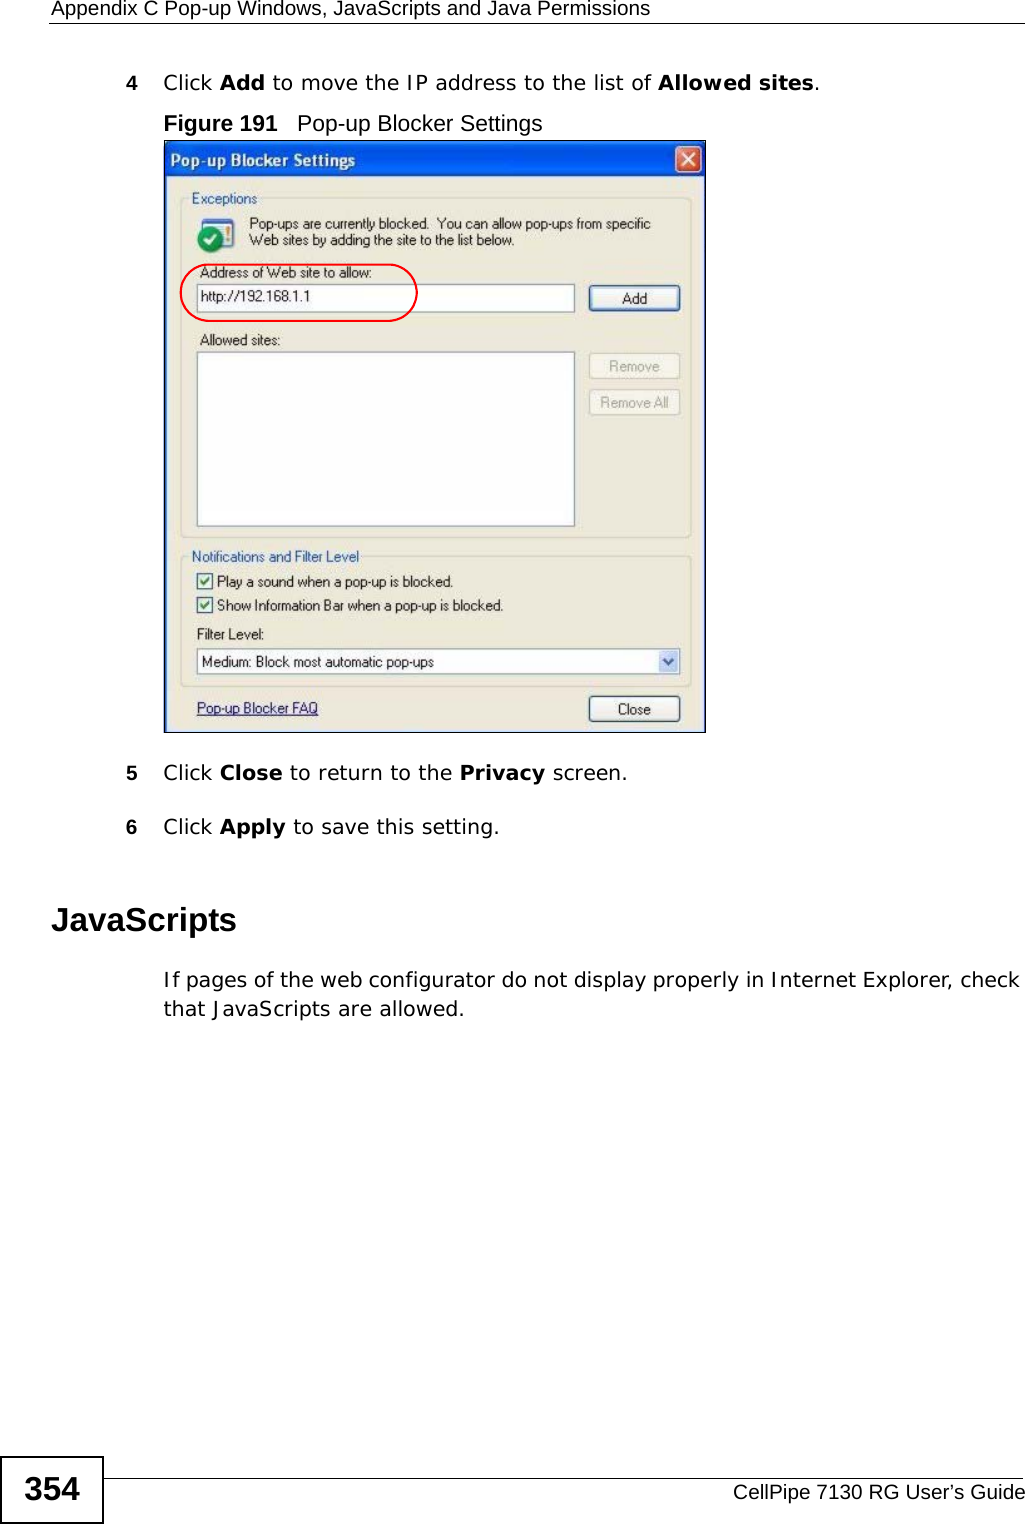 Appendix C Pop-up Windows, JavaScripts and Java PermissionsCellPipe 7130 RG User’s Guide3544Click Add to move the IP address to the list of Allowed sites.Figure 191   Pop-up Blocker Settings5Click Close to return to the Privacy screen. 6Click Apply to save this setting. JavaScriptsIf pages of the web configurator do not display properly in Internet Explorer, check that JavaScripts are allowed. 